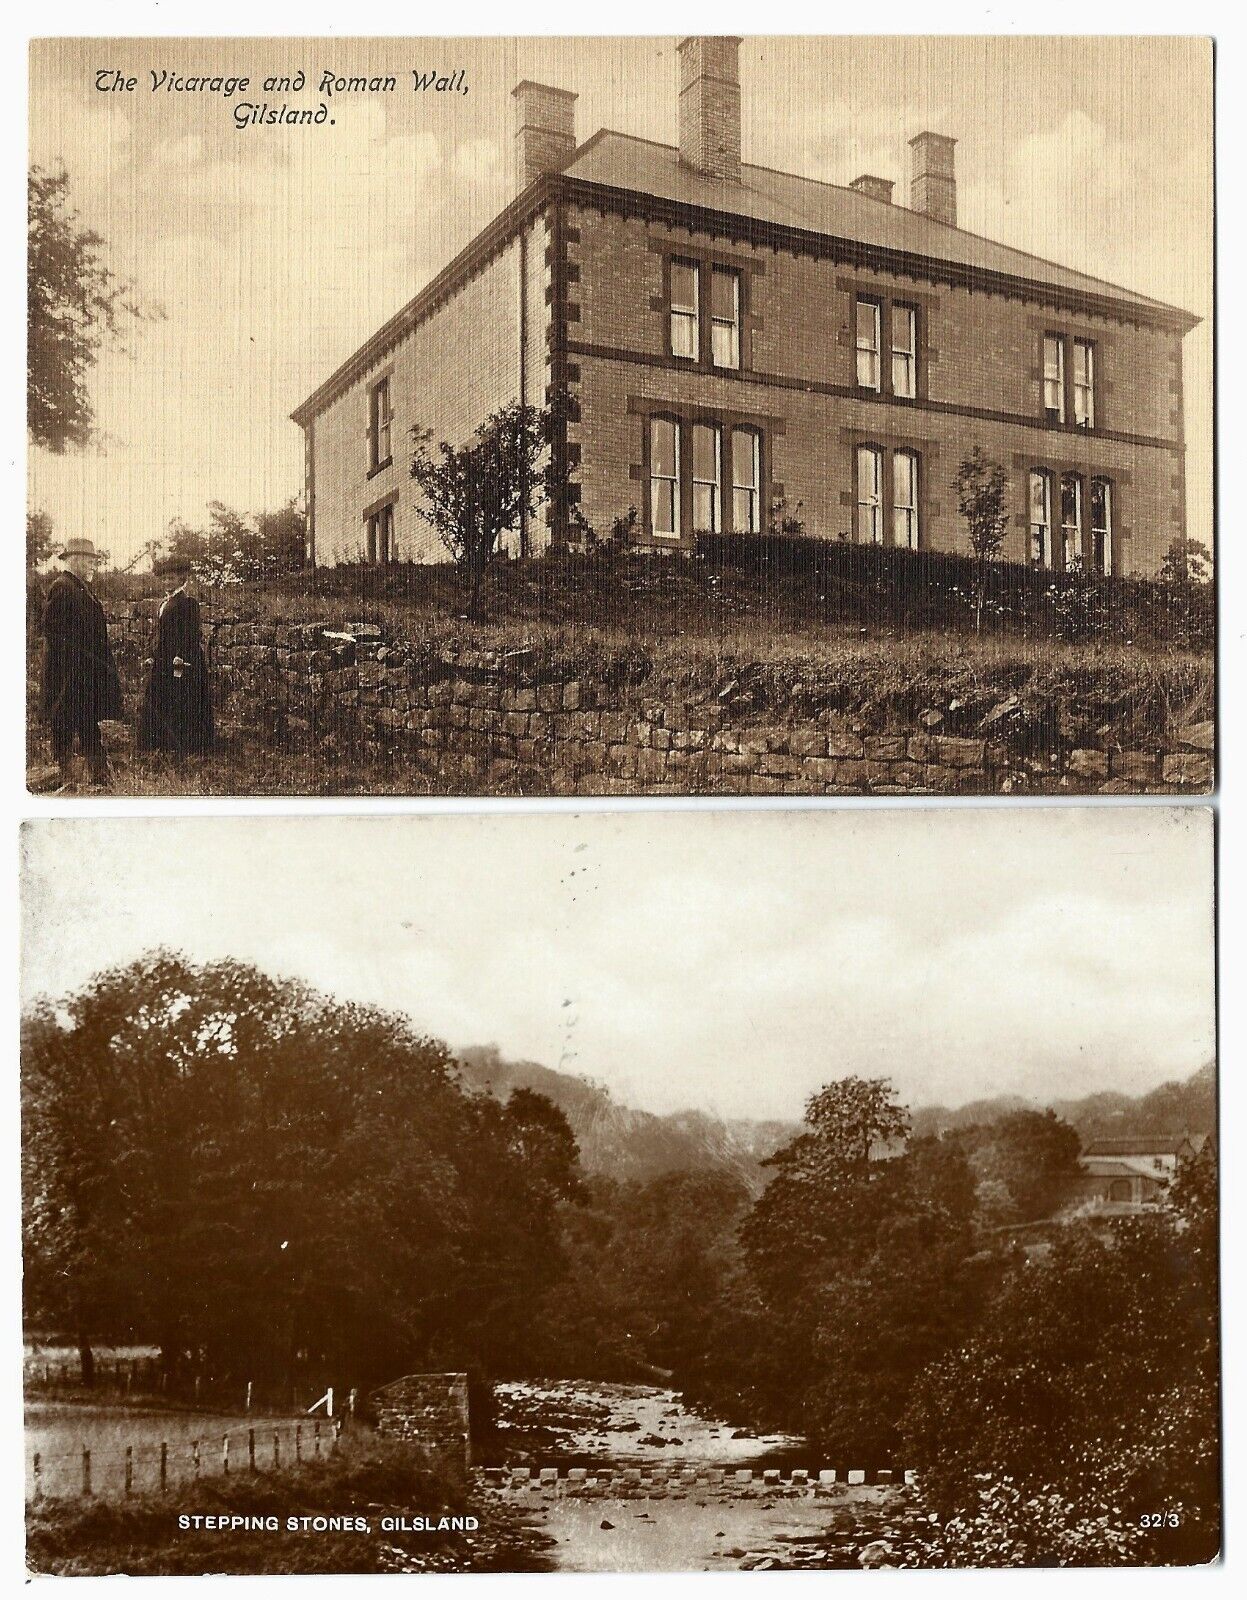 House Clearance - 2 x GILSLAND, Cumbria - Vicarage & Roman Wall + Stepping Stones  c.1910 & 1932